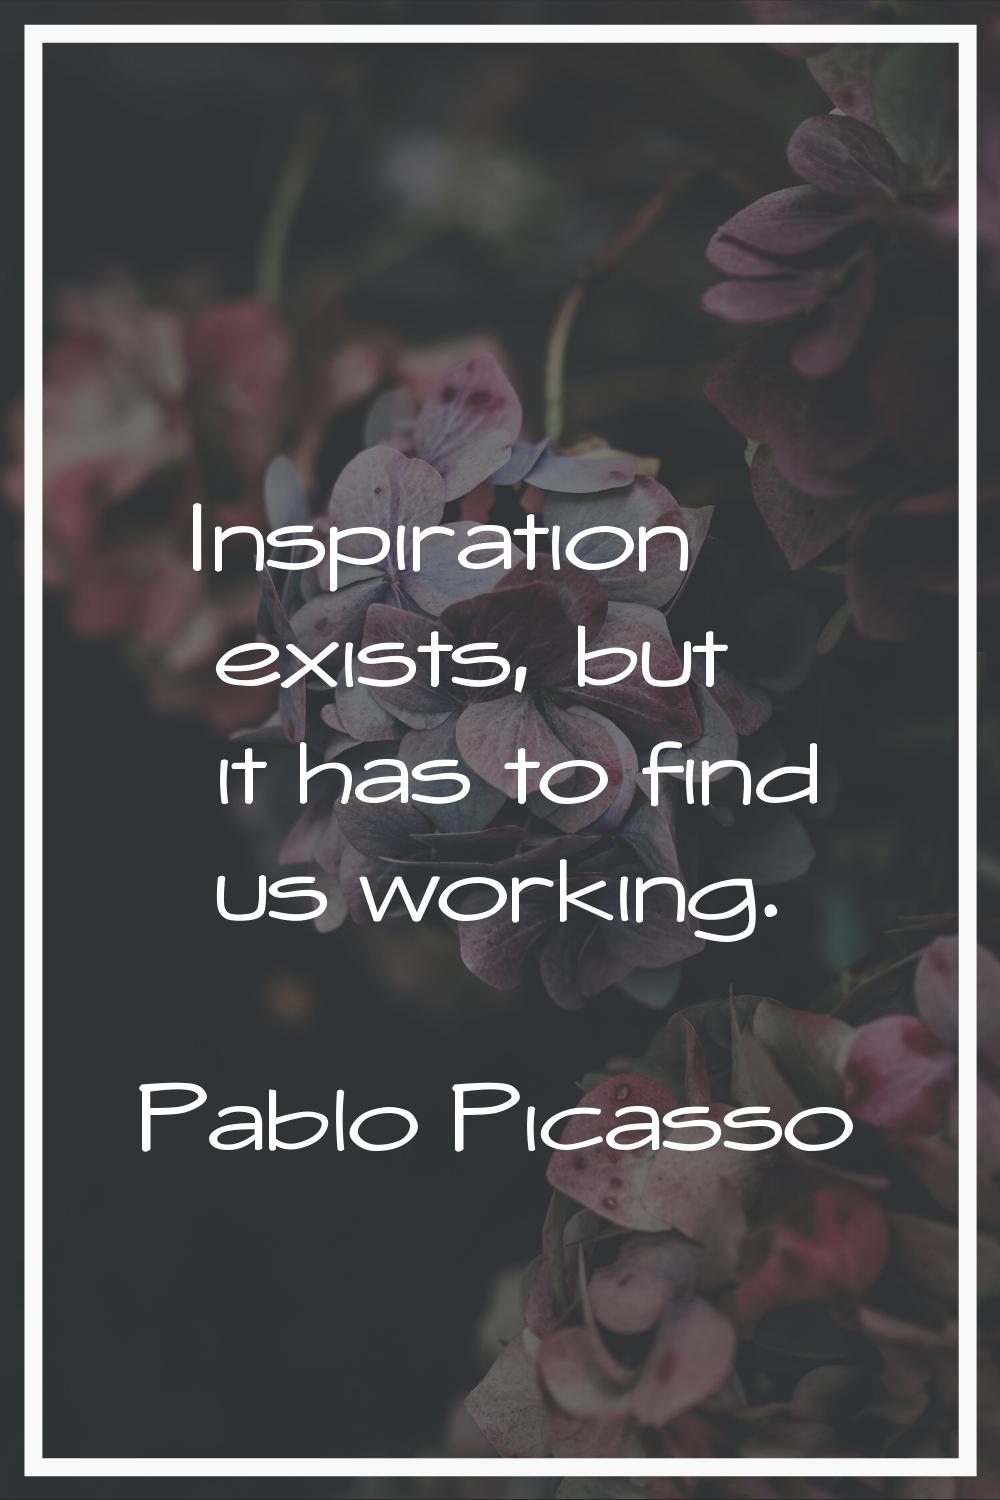 Inspiration exists, but it has to find us working.